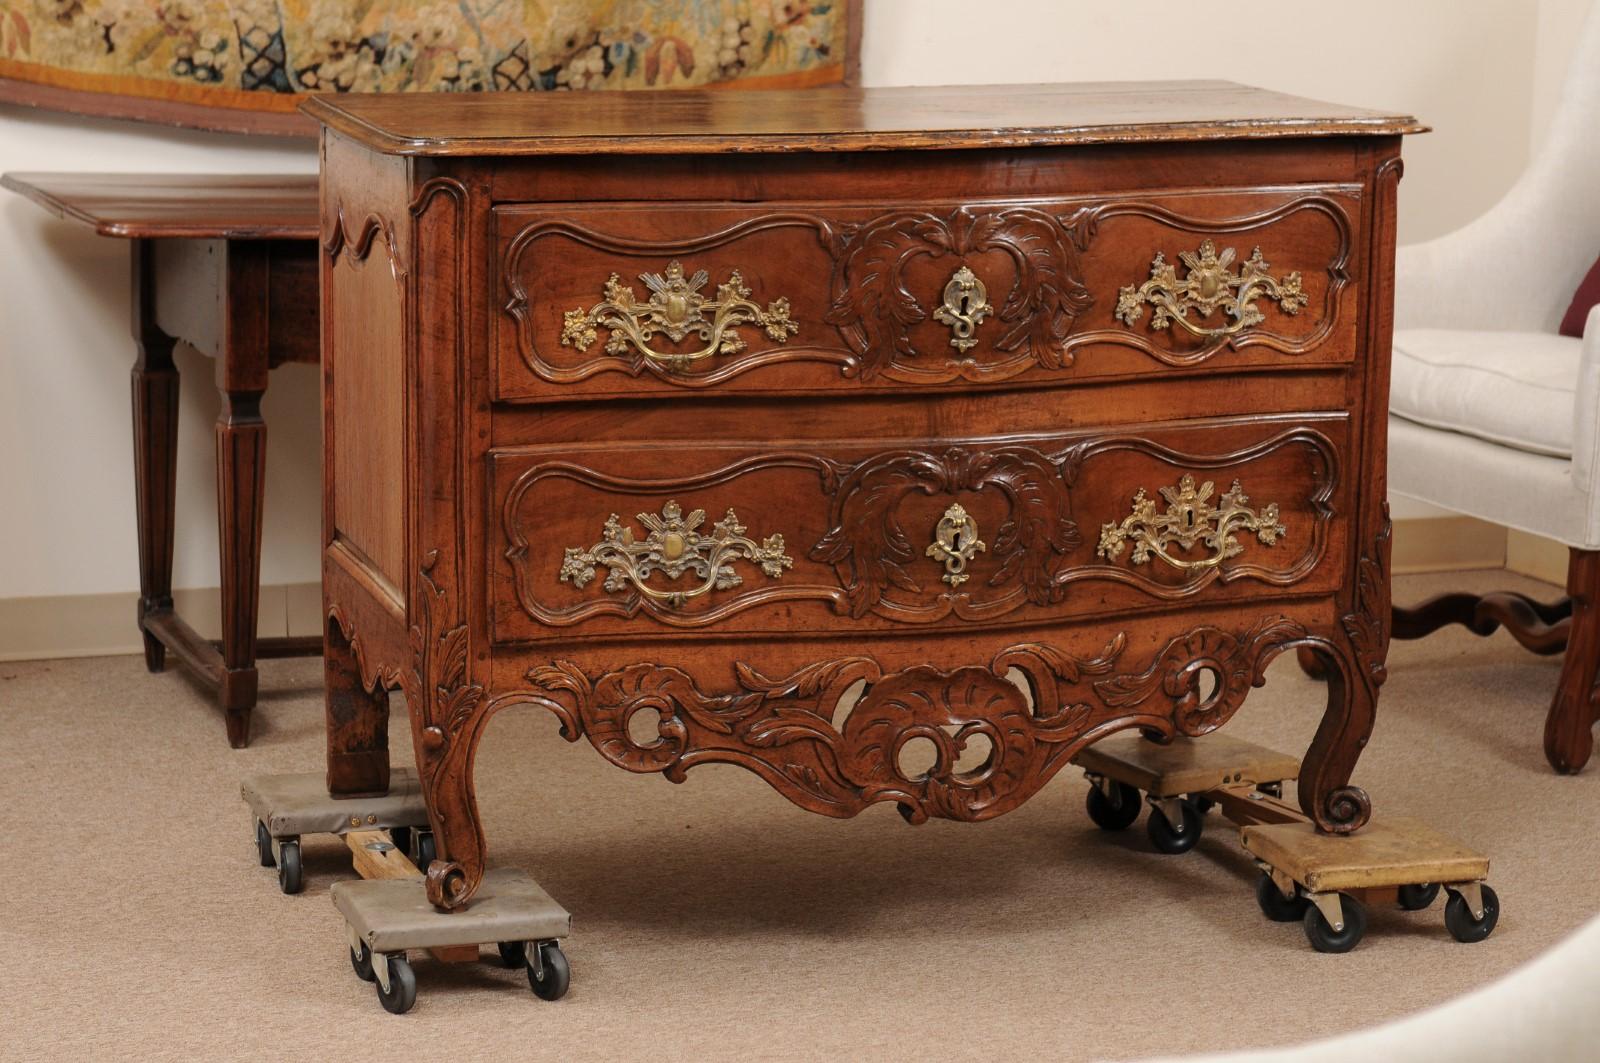 Louis XV period walnut commode with two (2) drawers, pierced carved apron, and cabriole legs, mid-18th century France.